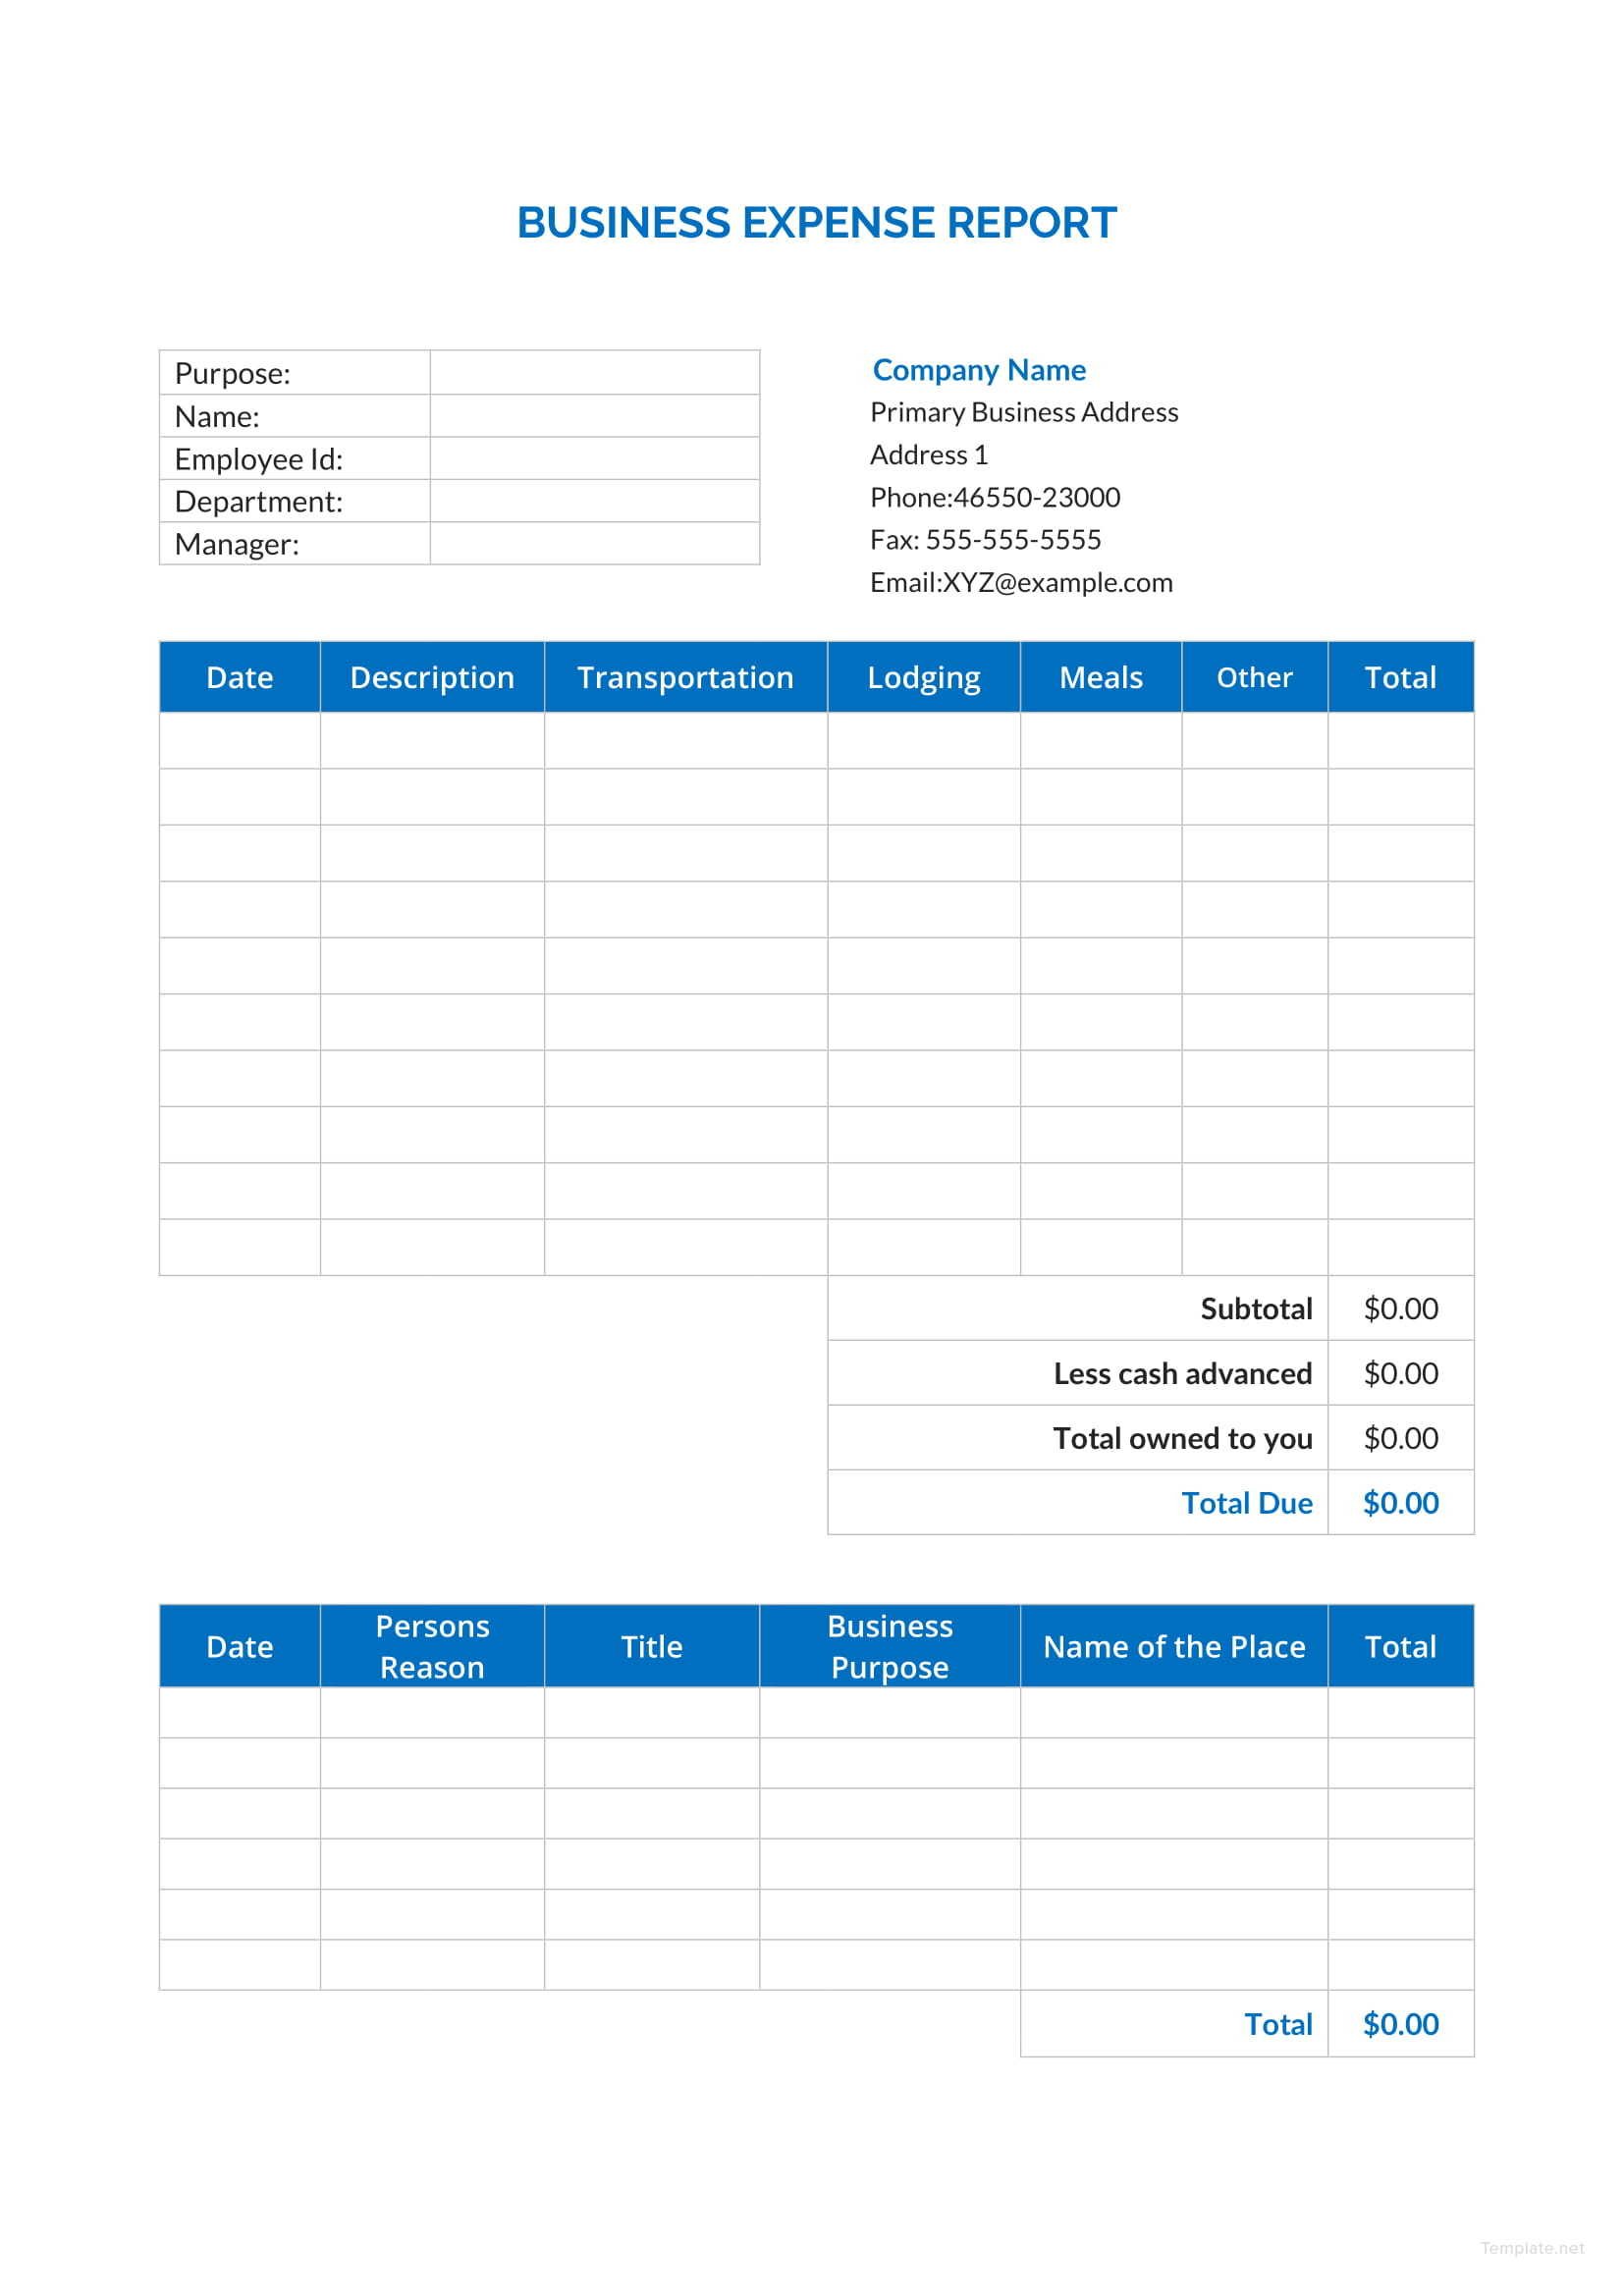 Business Expense Report Template in Microsoft Word, Excel, Apple Pages